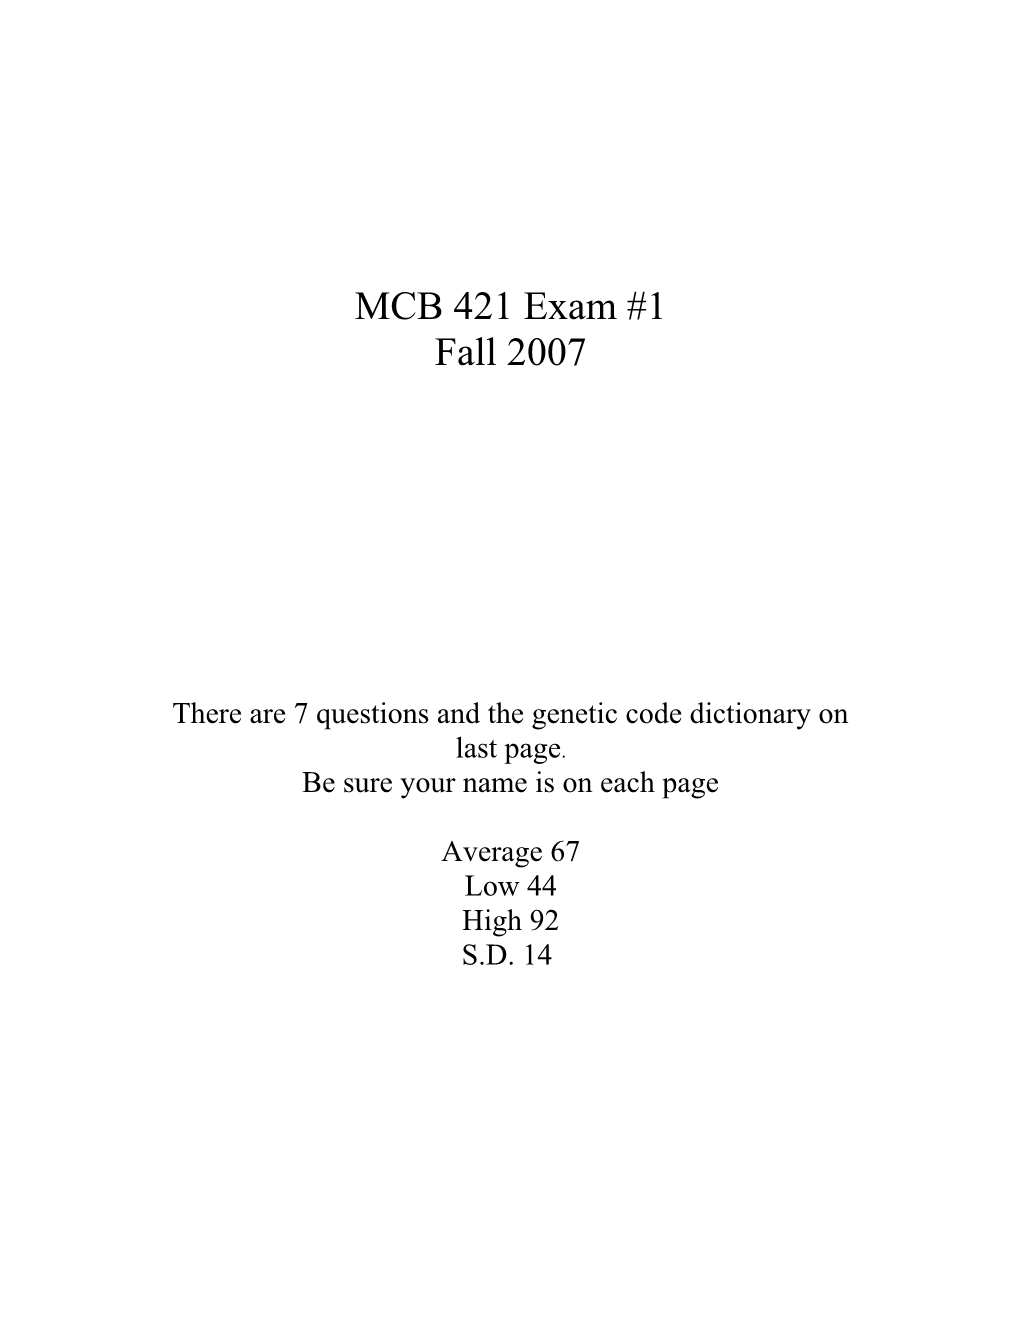 There Are 7 Questions and the Genetic Code Dictionary on Last Page